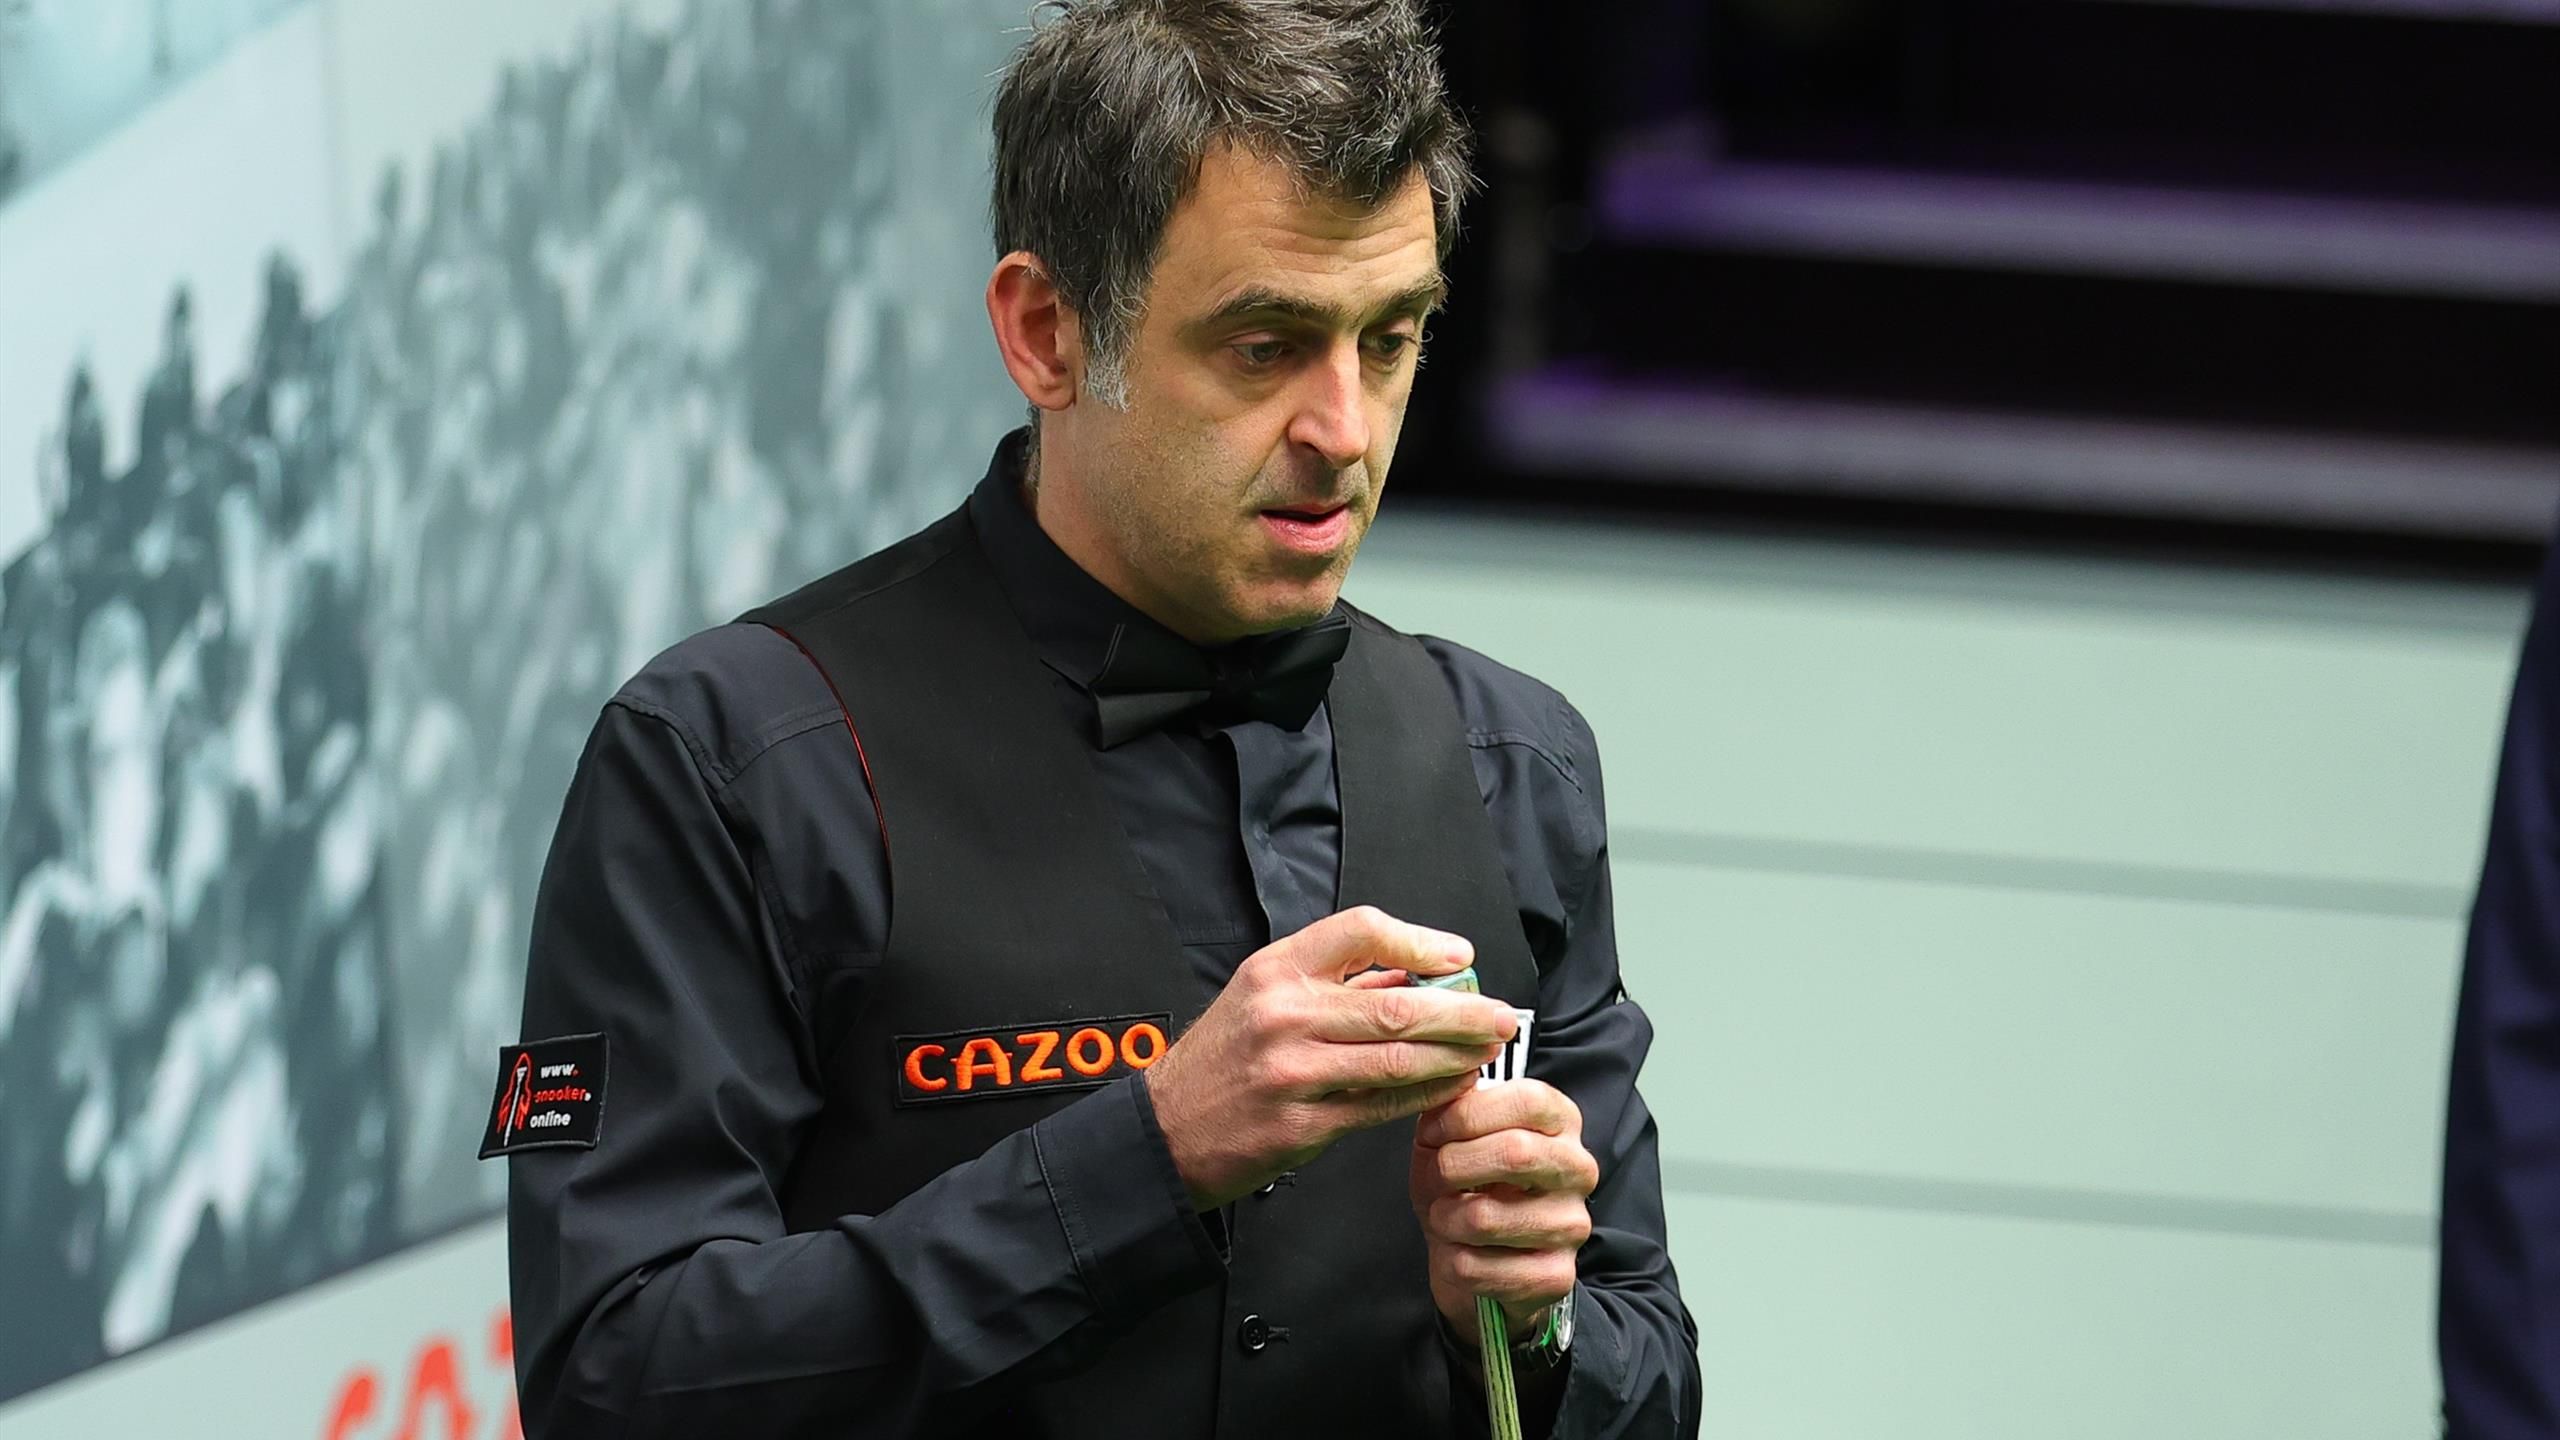 World Snooker Championship 2023 LIVE Ronnie OSullivan takes on Pang Junxu, latest scores and live stream